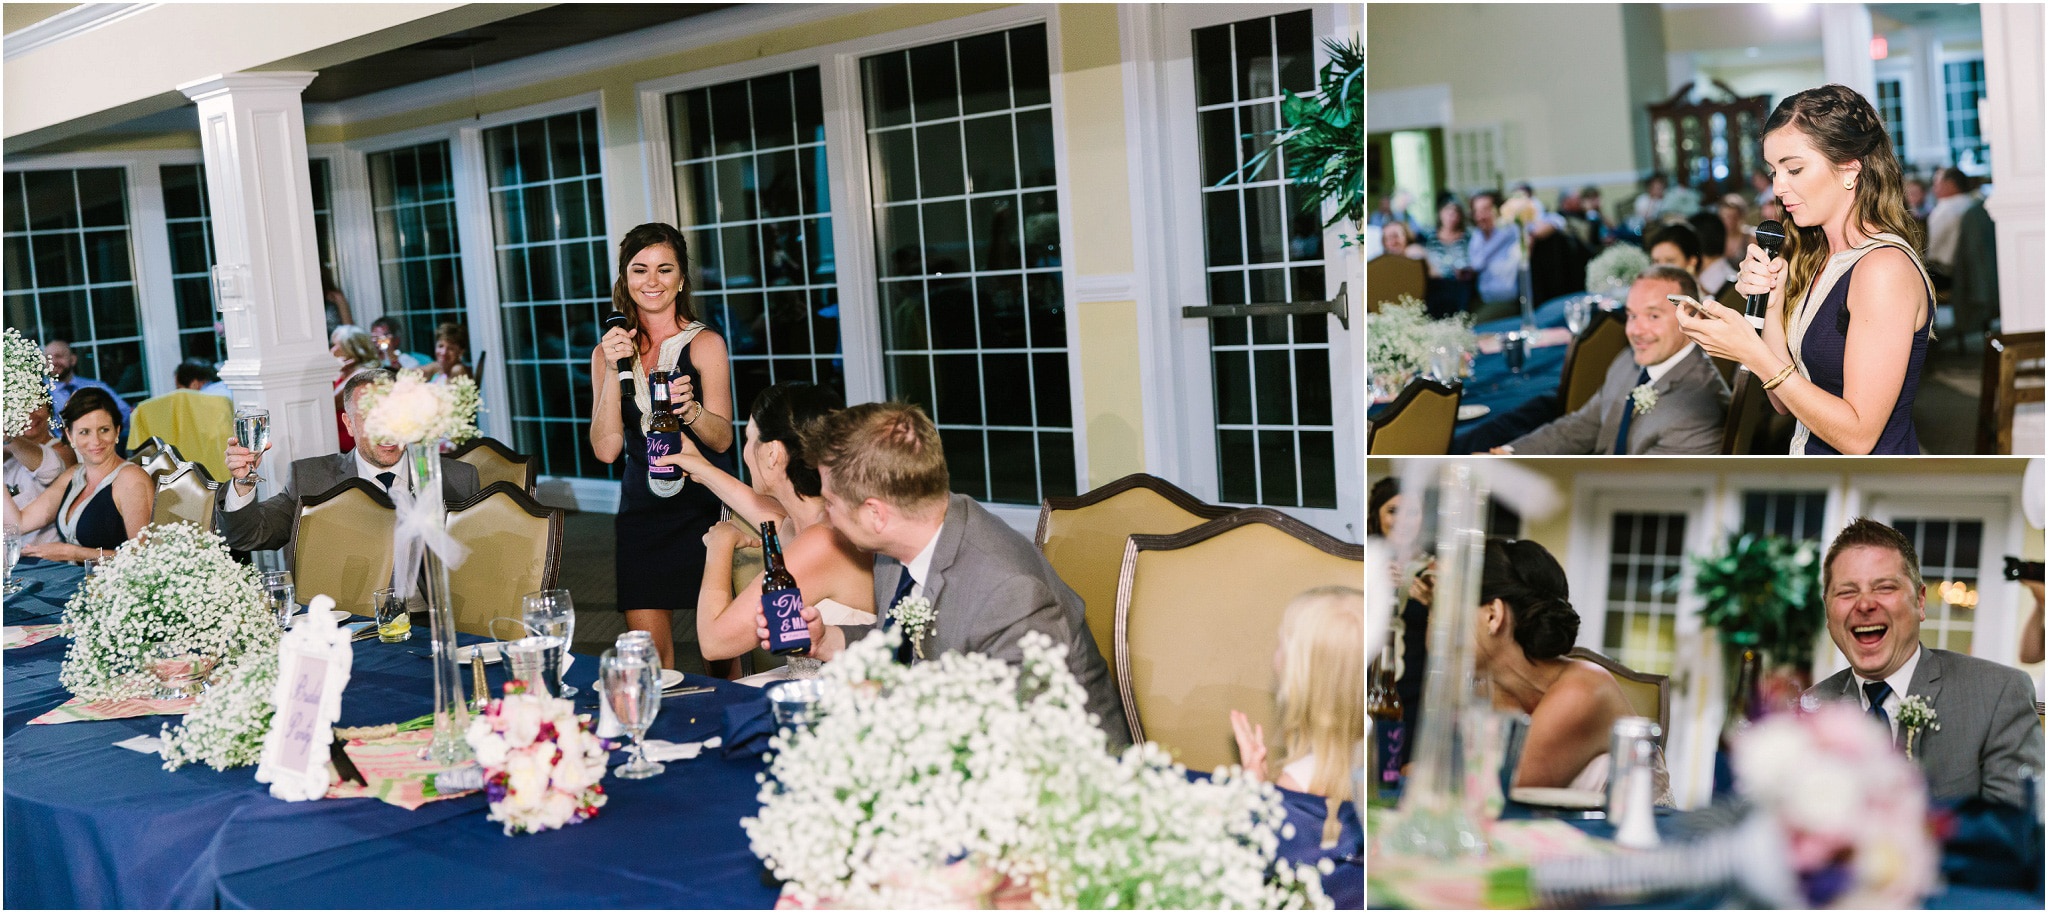 Maid of honor speech, toasts and fun